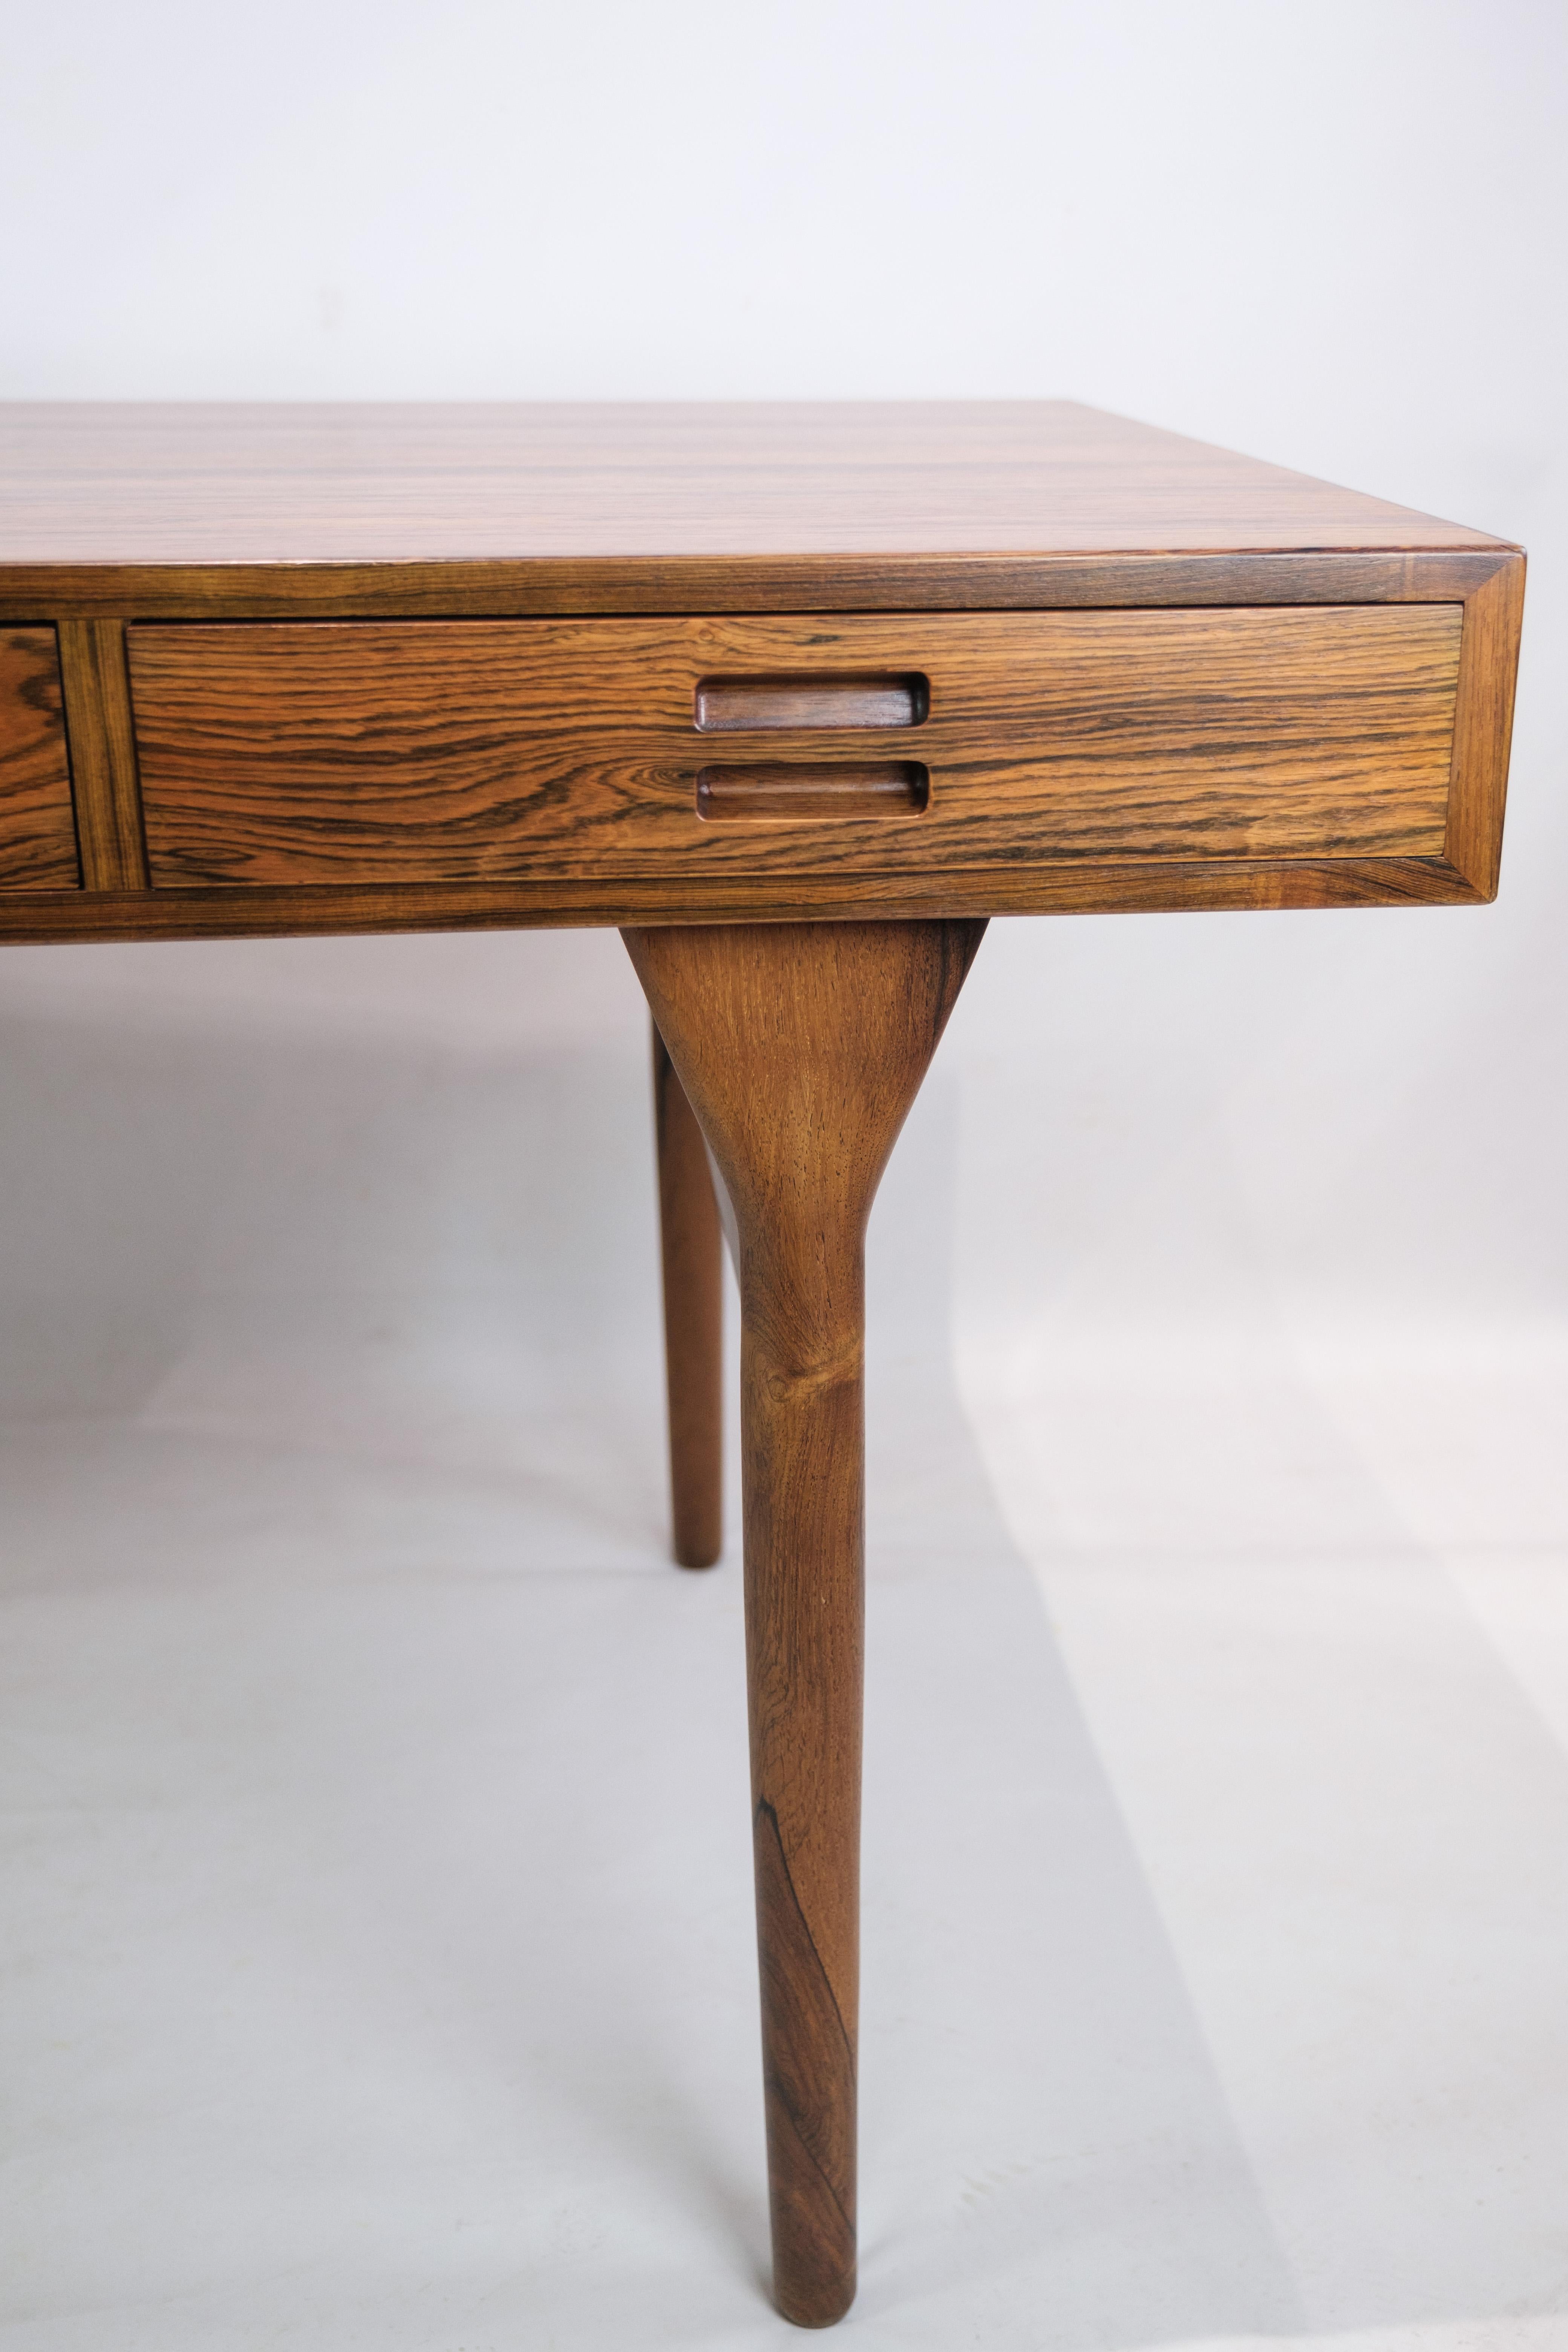 Nanna Ditzel rosewood desk, with four drawers, round conical legs. Designed 1958. Manufactured by Søren Willadsen, Vejen. The desktop has been recently refurbished.
Dimensions in cm: H: 71.5 W: 175 D: 75
Excellent condition

This product will be